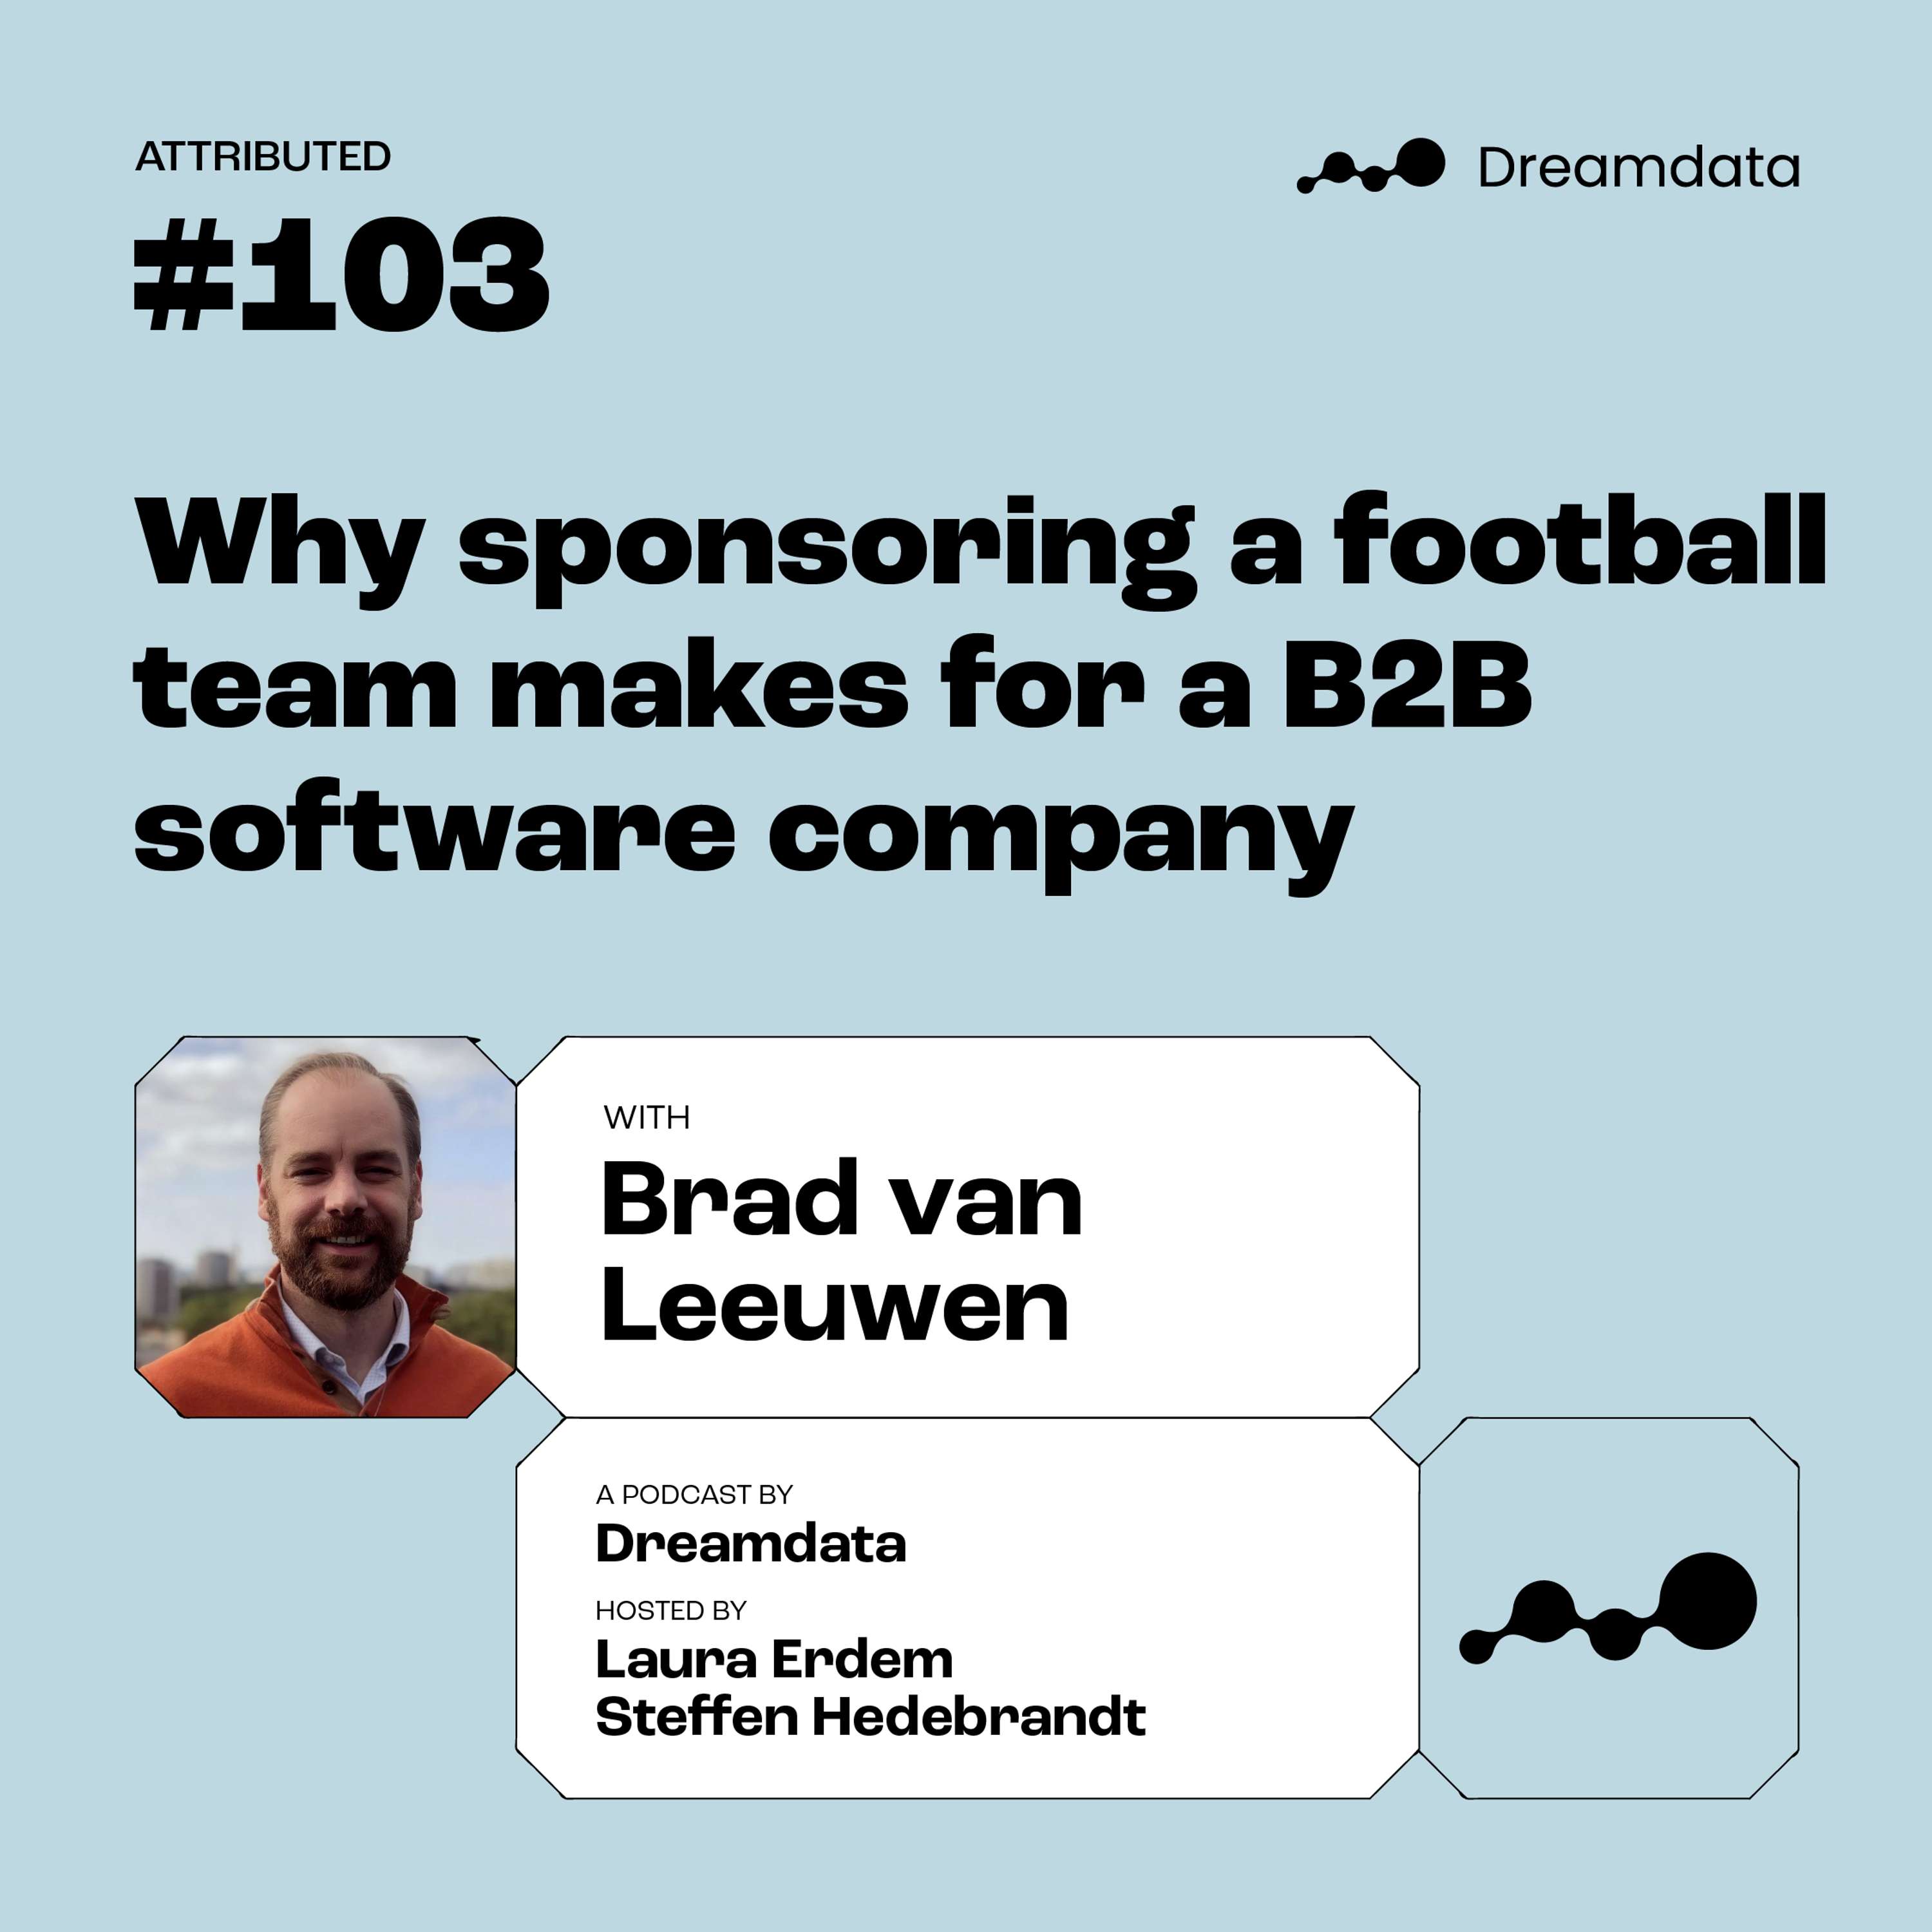 Why sponsoring a football team makes sense for a B2B software company